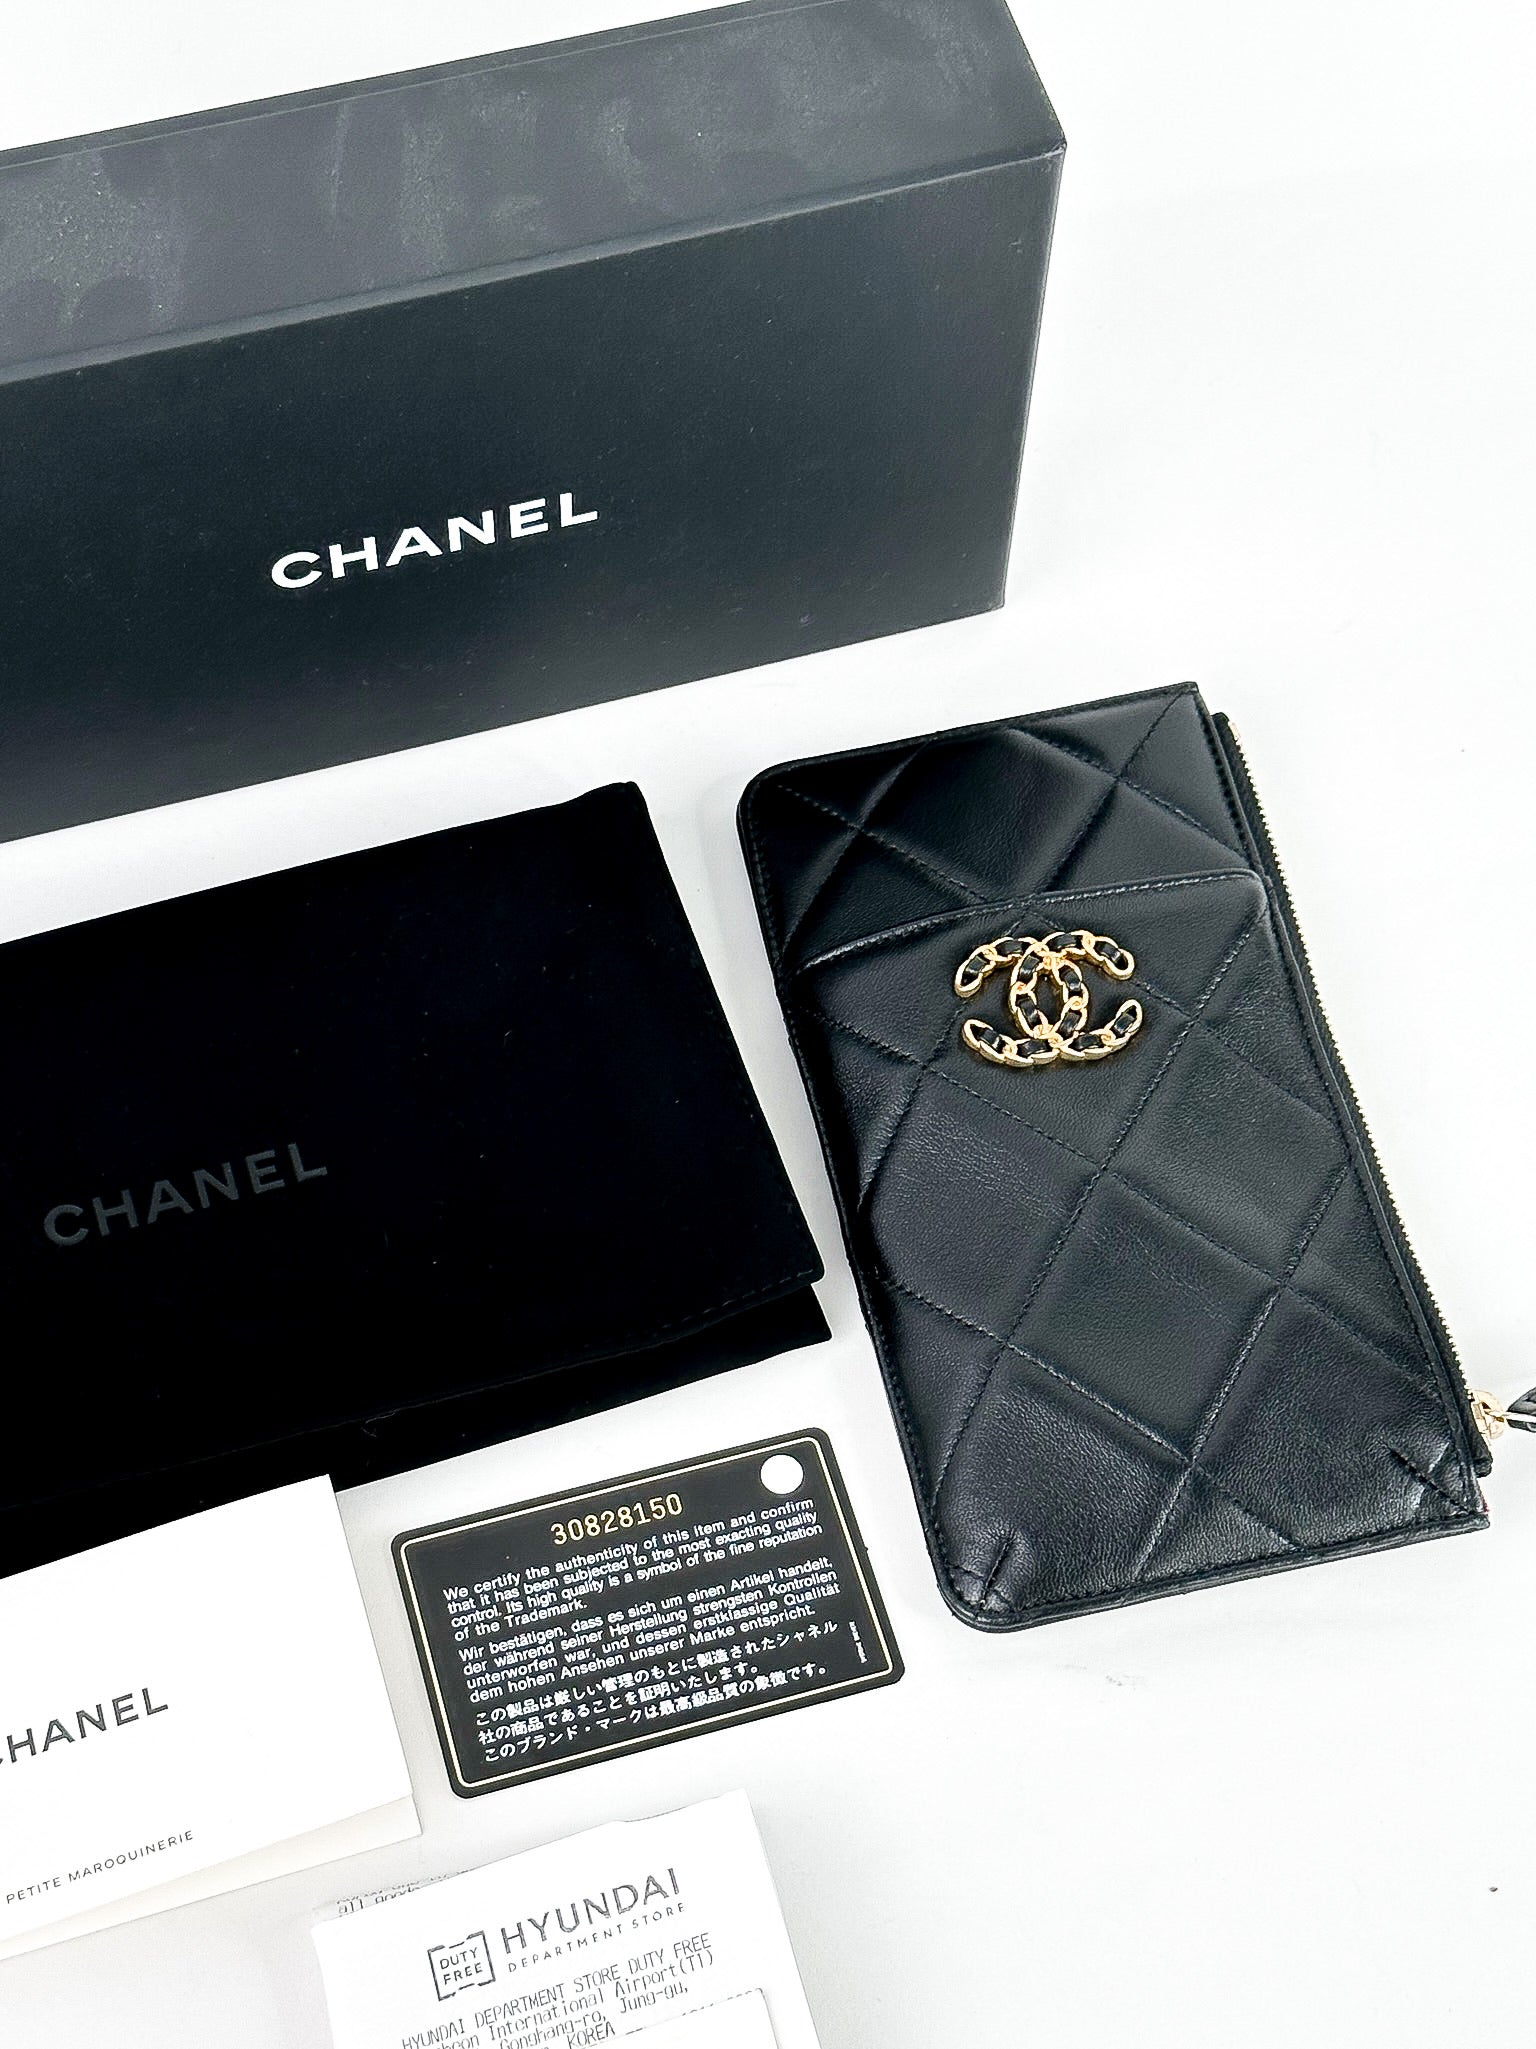 Luxurious and Fashionable Leather Chanel Phone Case